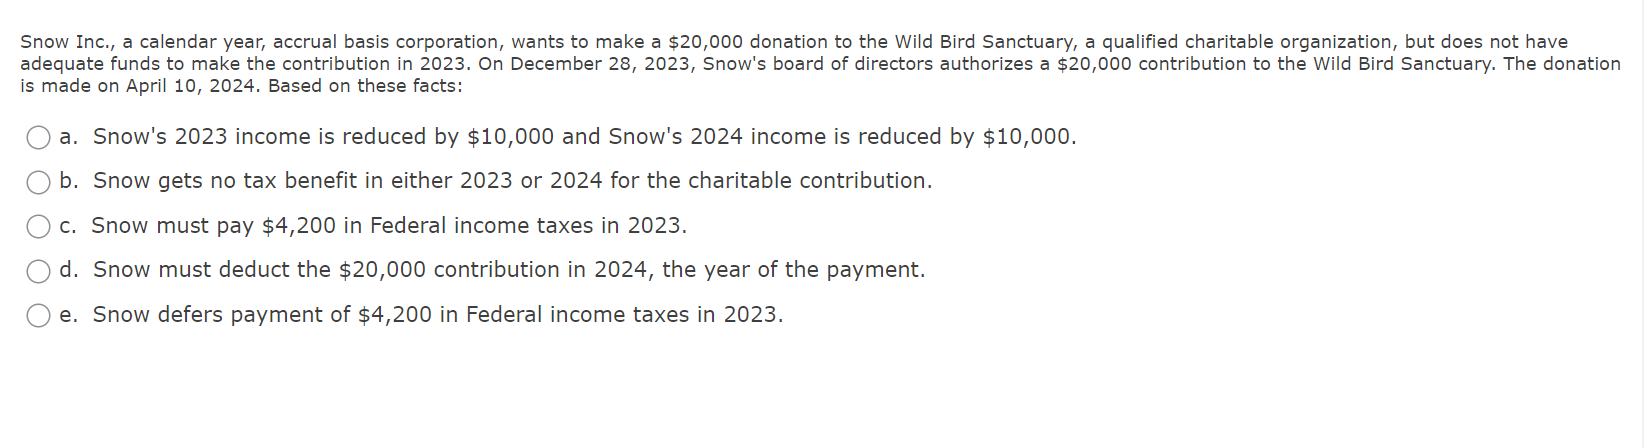 Snow Inc., a calendar year, accrual basis corporation, wants to make a $20,000 donation to the Wild Bird